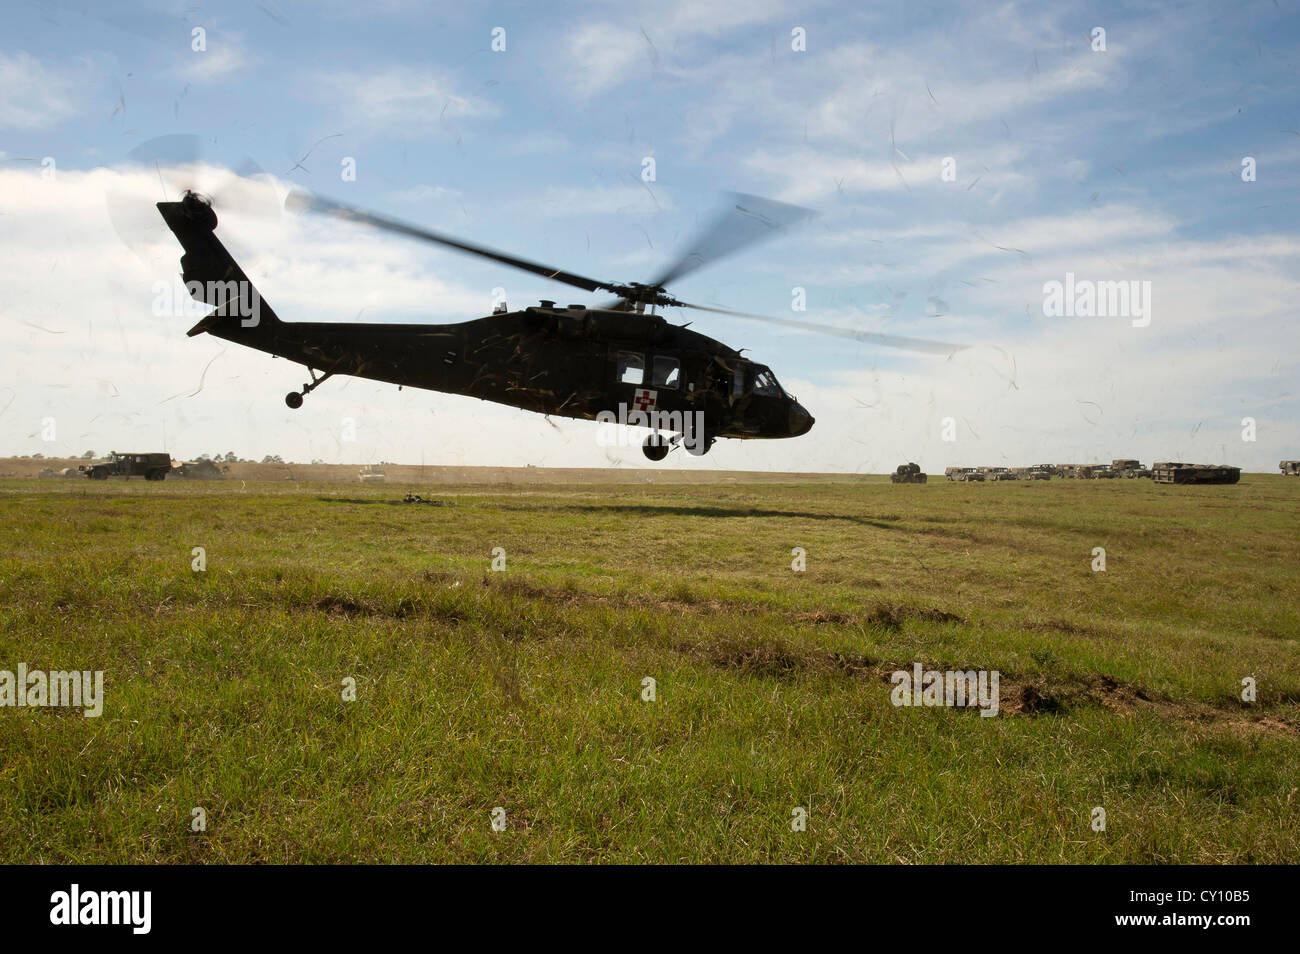 A U.S. Army UH-60M Black Hawk helicopter takes off from a landing zone after retrieving simulated patients during a field exercise at the Joint Readiness Training Center (JRTC), Fort Polk, La., Oct. 15, 2012. JRTC 13-01 is designed to prepare and educate U.S. military Service members for deployments to the Middle East. Stock Photo